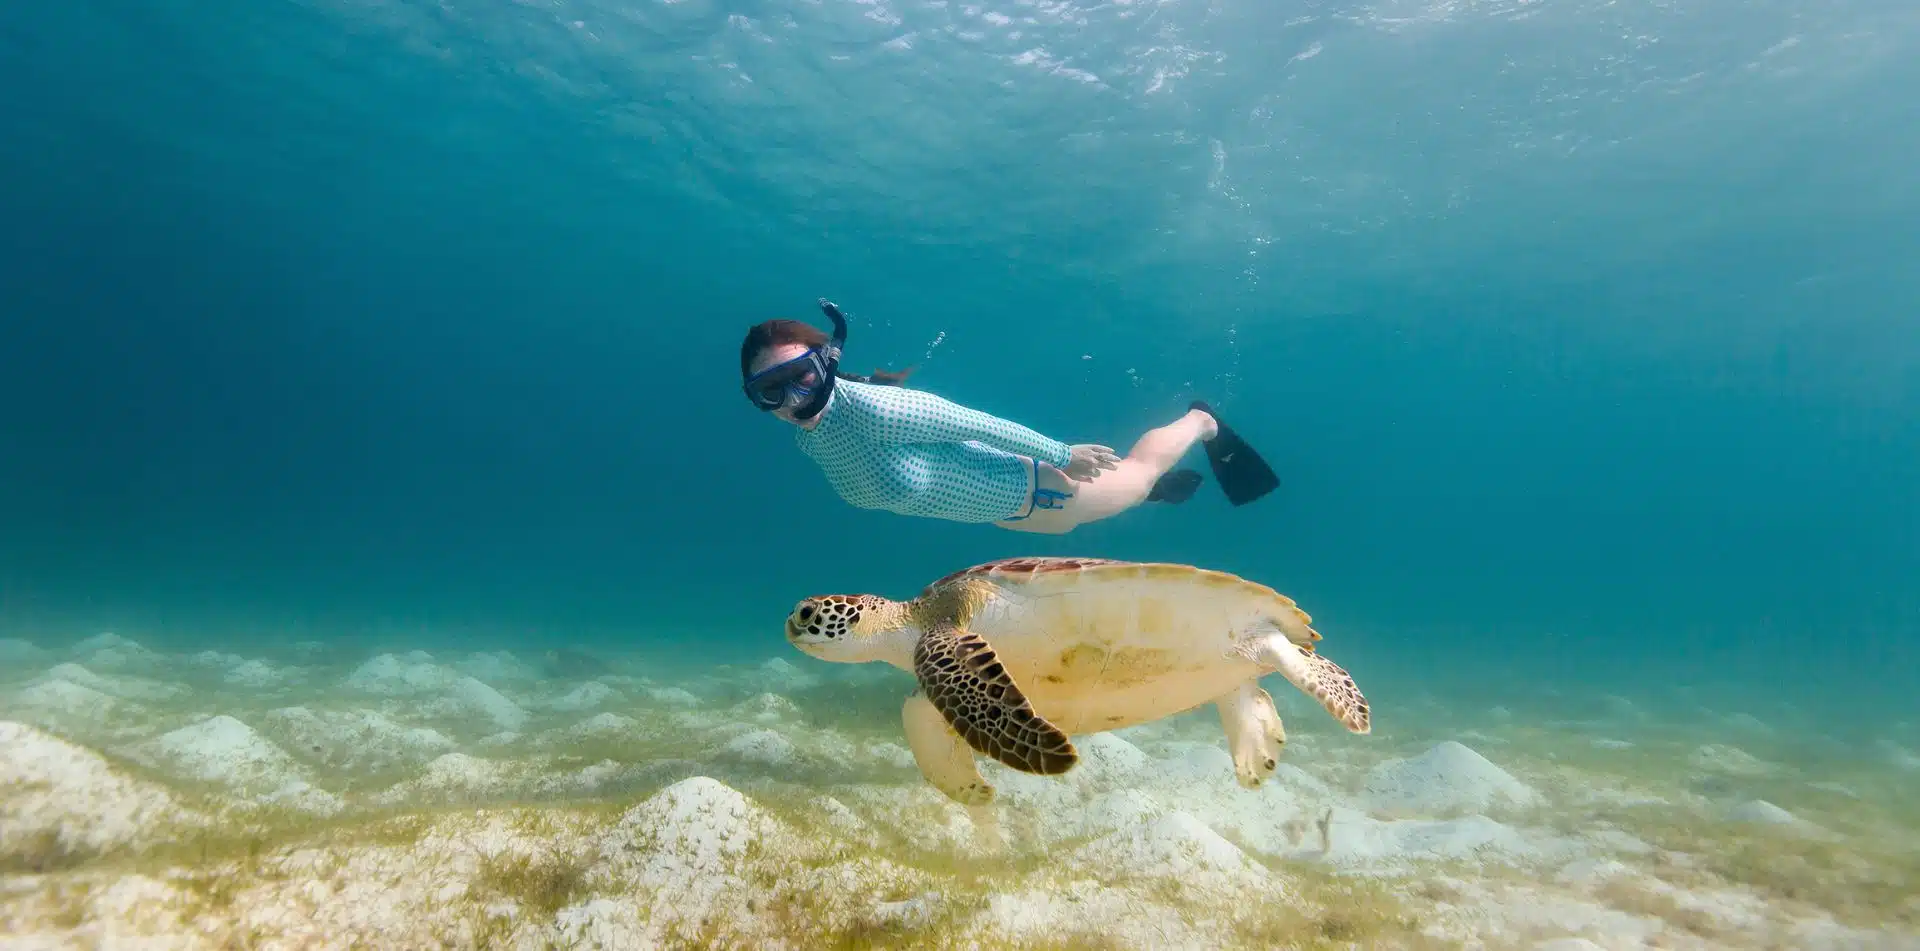 Snorkel with the marine life in the Galapagos